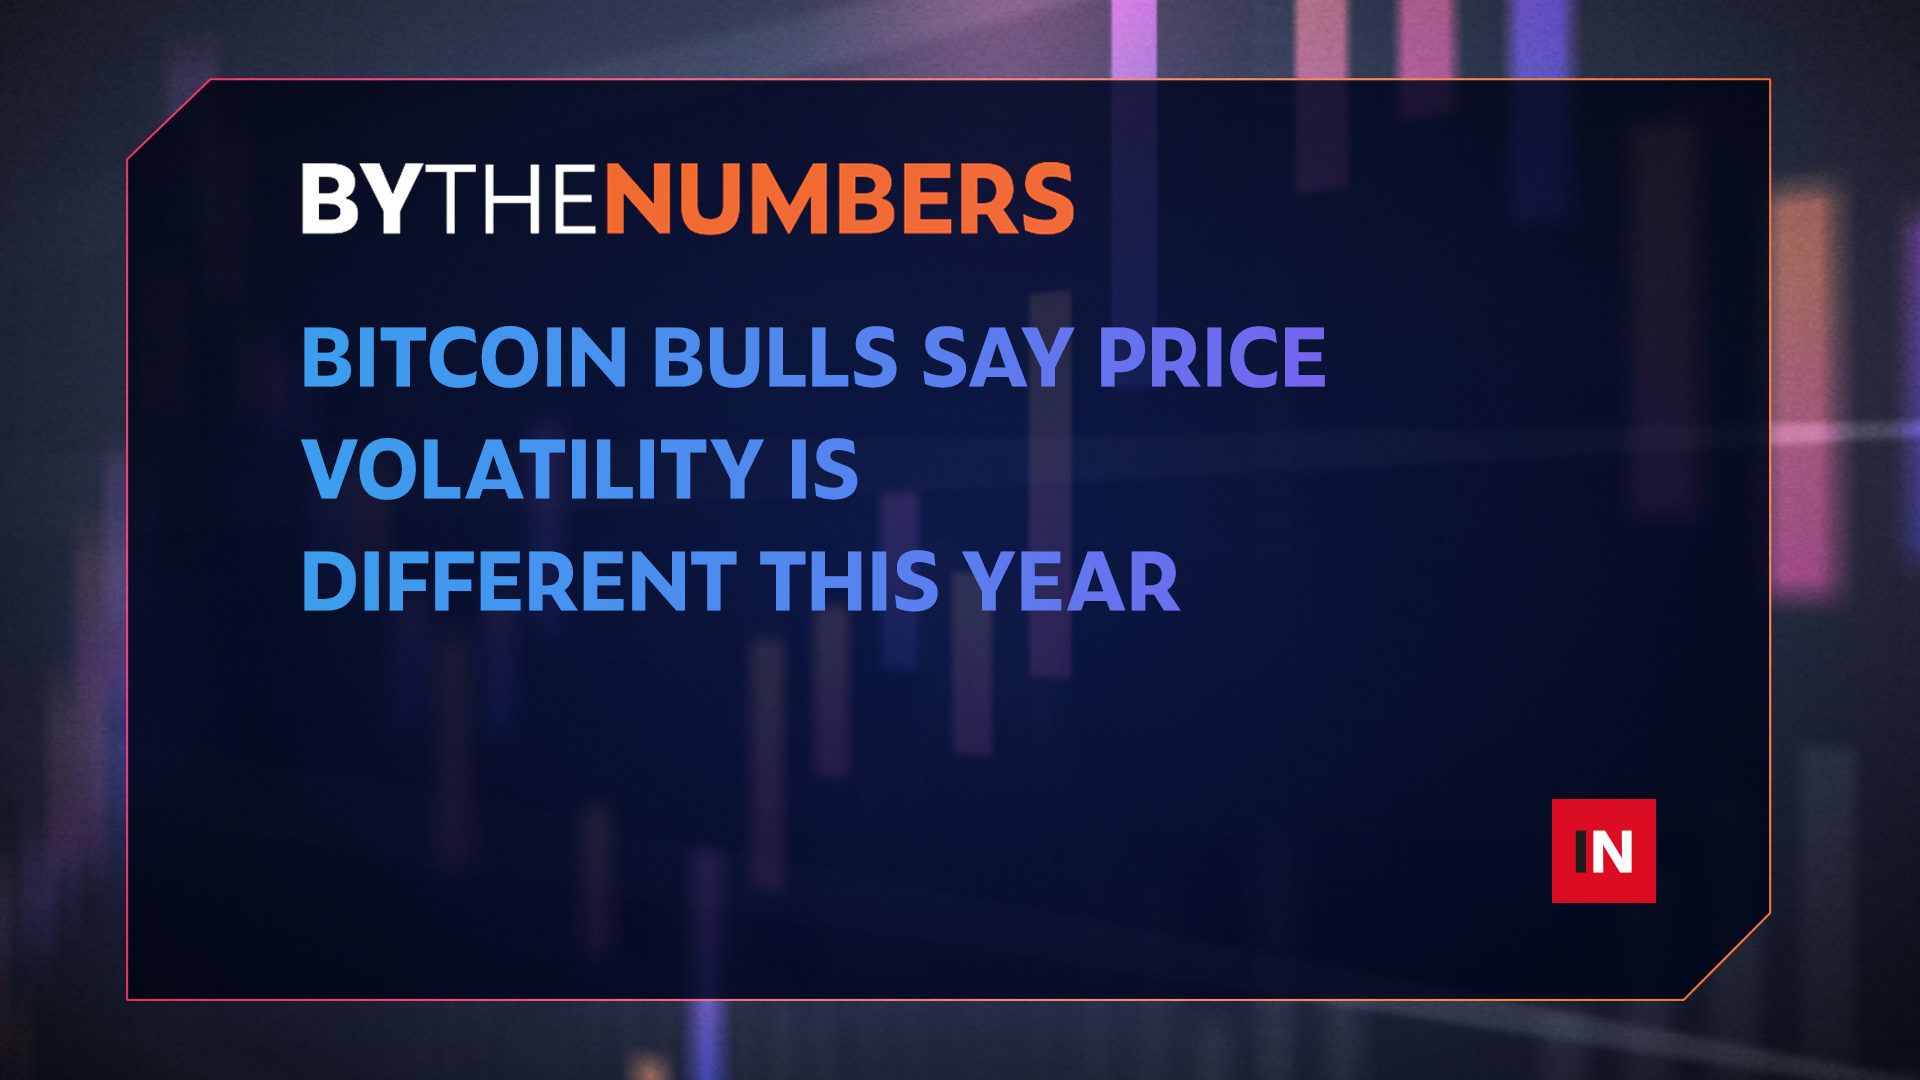 Bitcoin bulls say price volatility is different this year